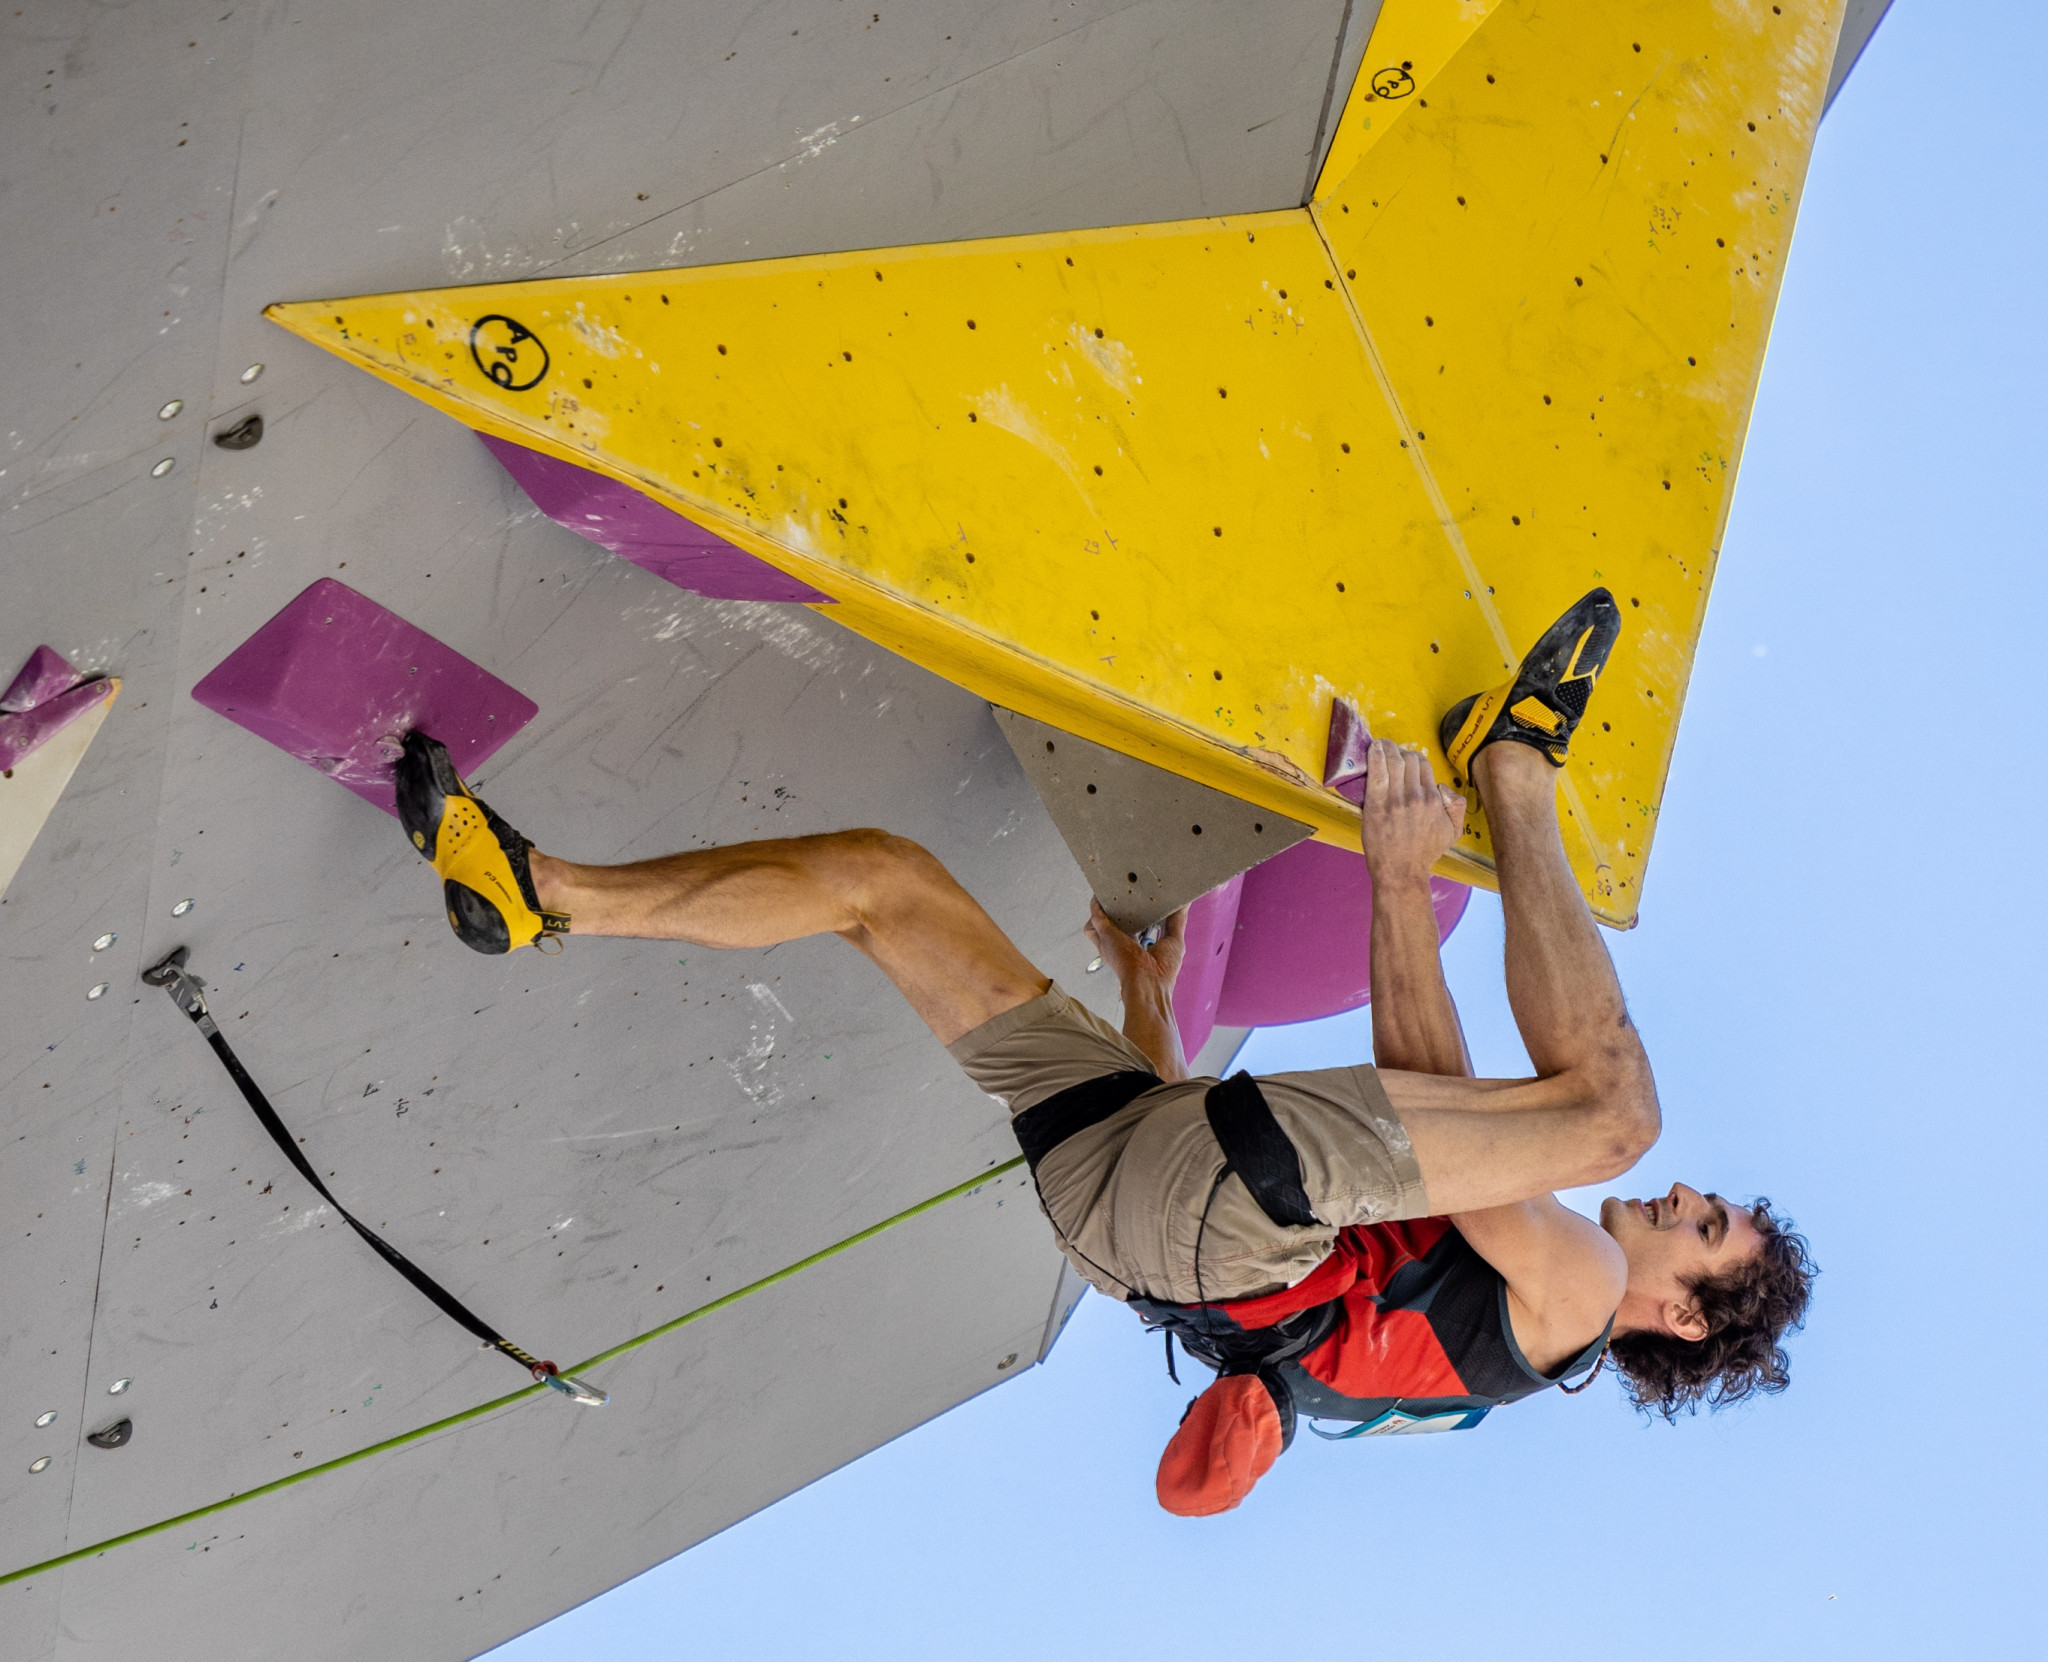 Ondra claims victory at IFSC World Cup in Briançon for 23rd gold medal of career